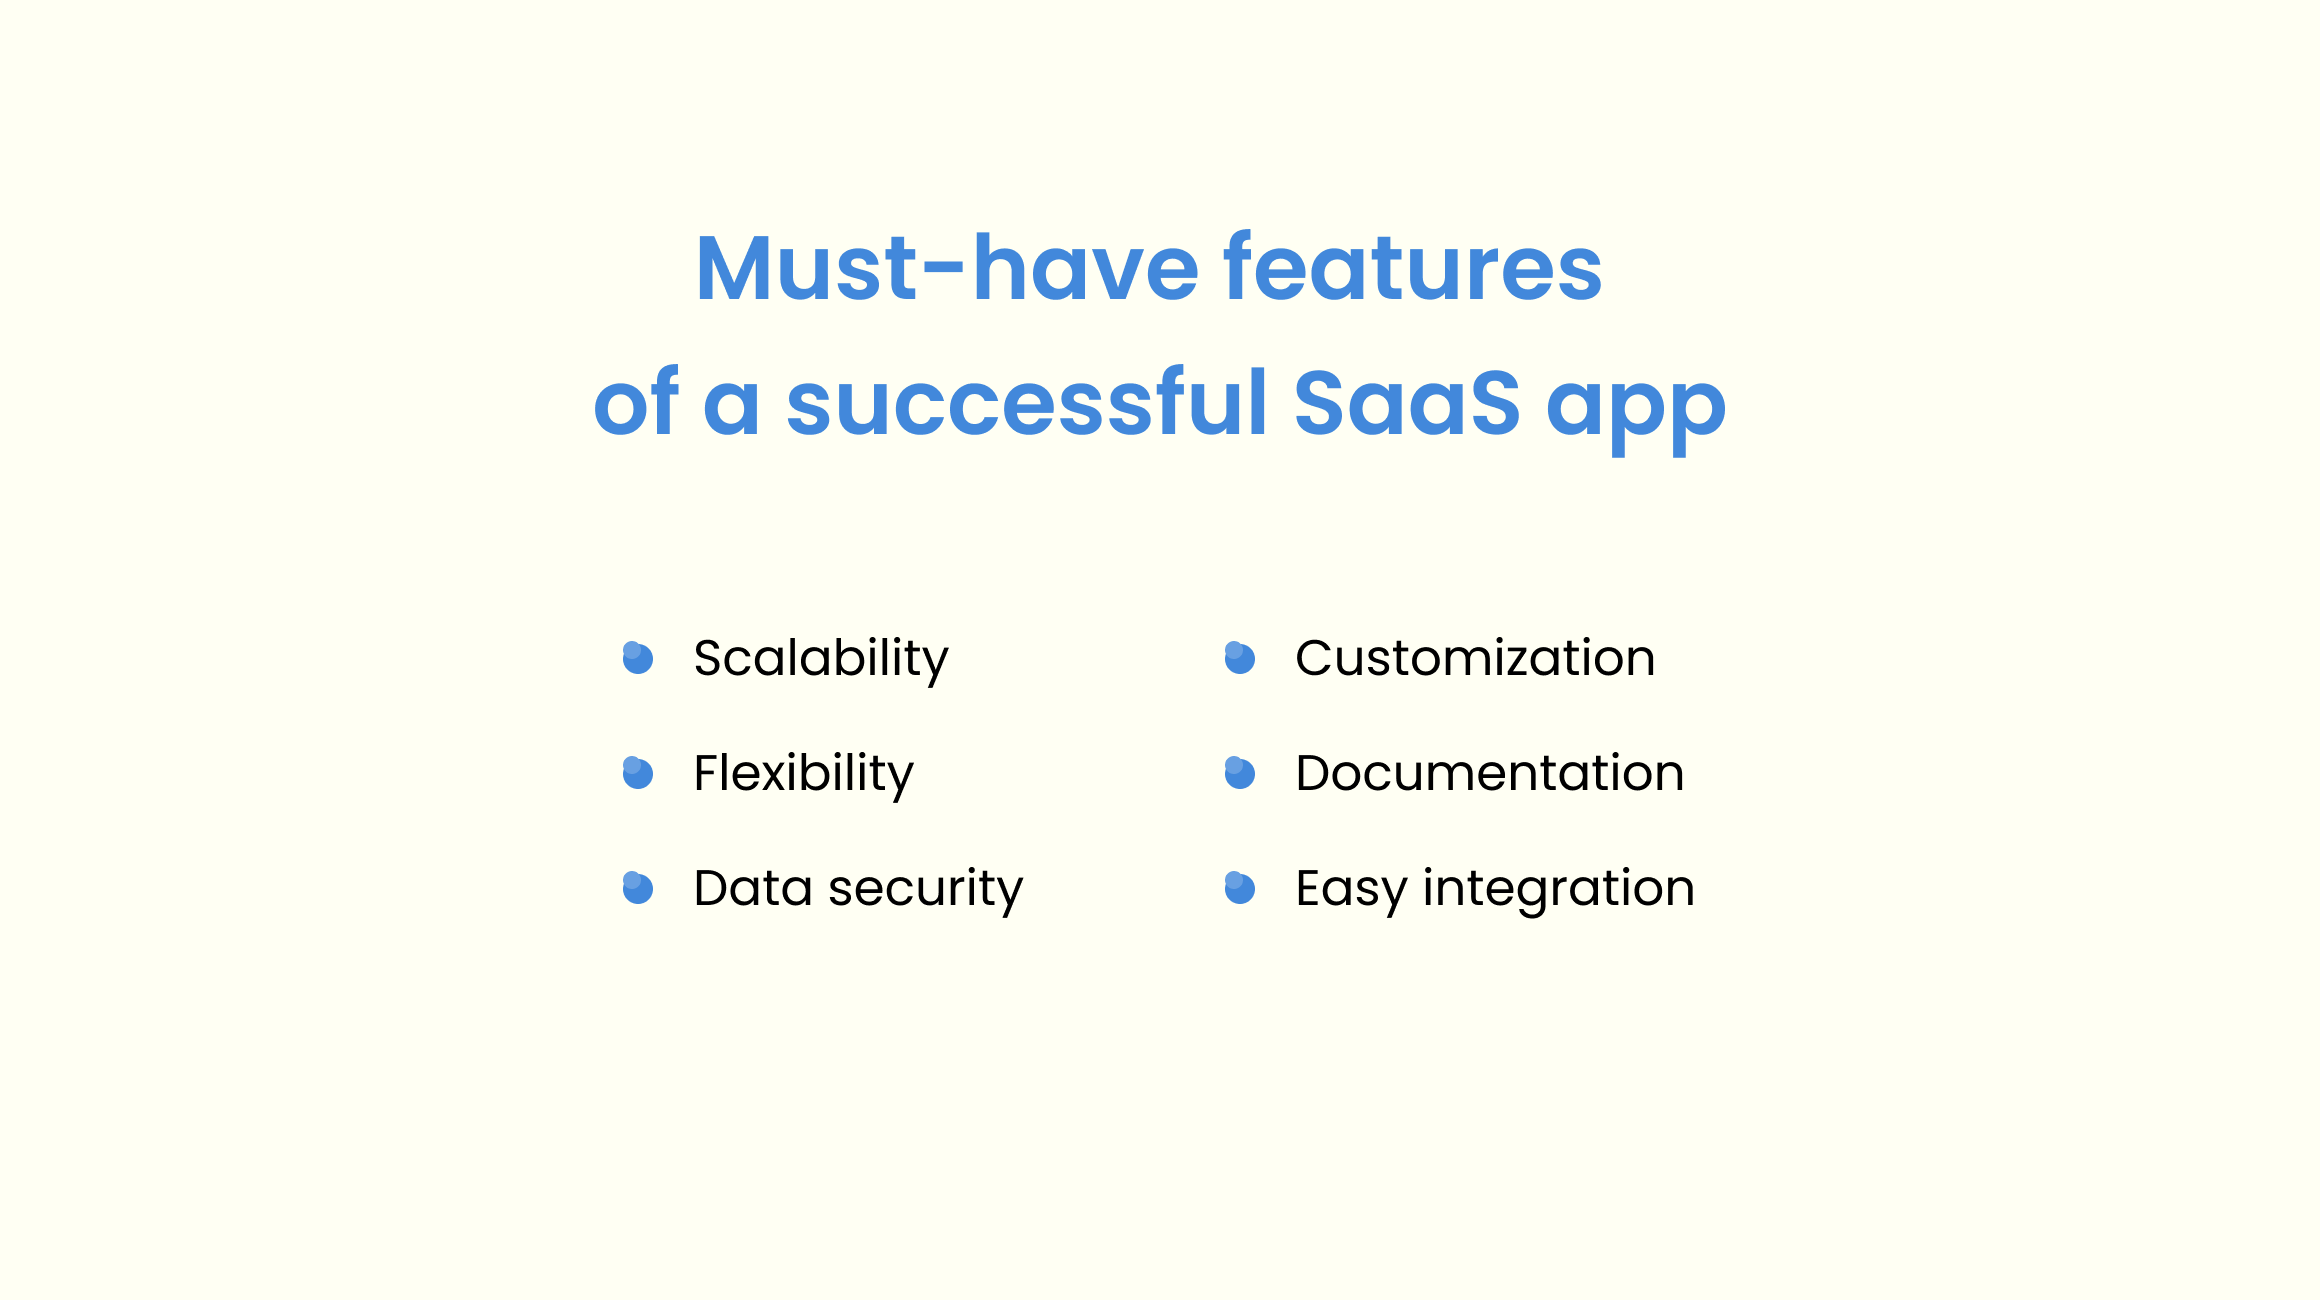 Features of a successful SaaS app